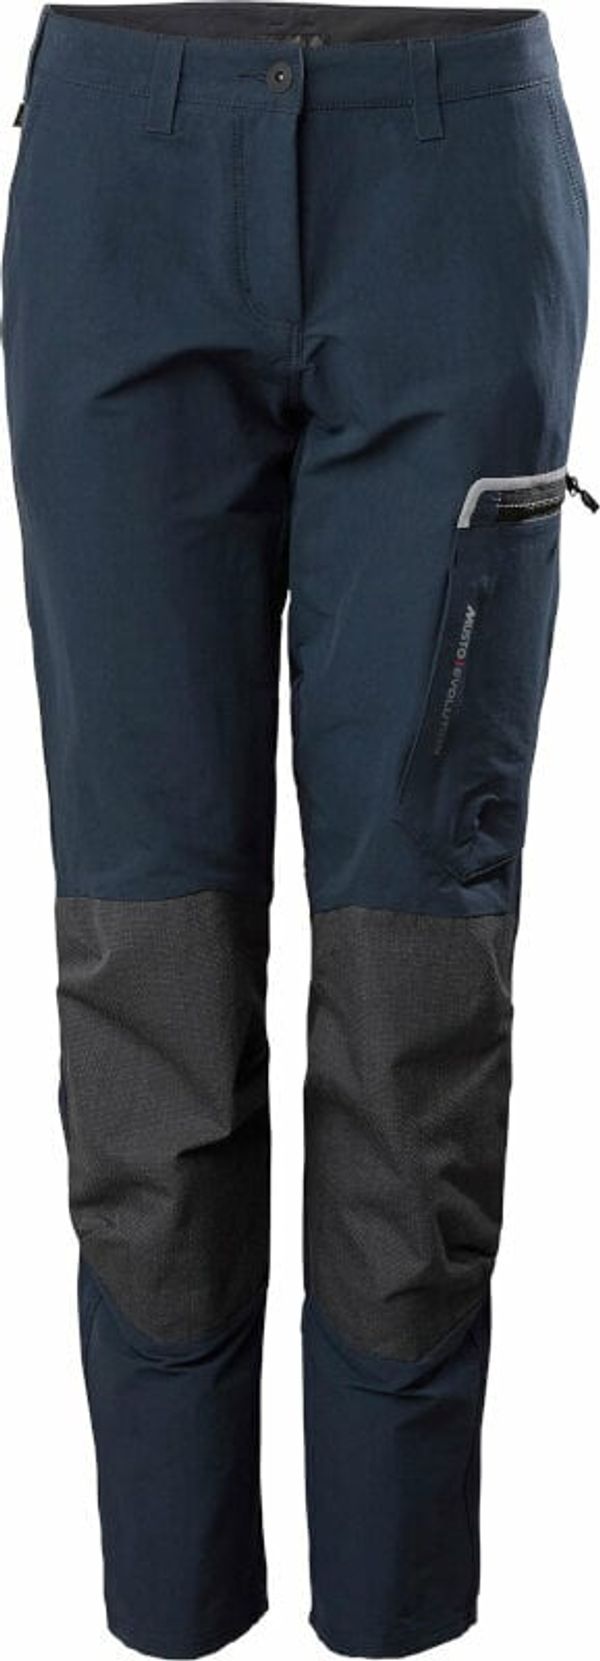 Musto Musto Evolution Performance 2.0 FW True Navy 8/R Trousers